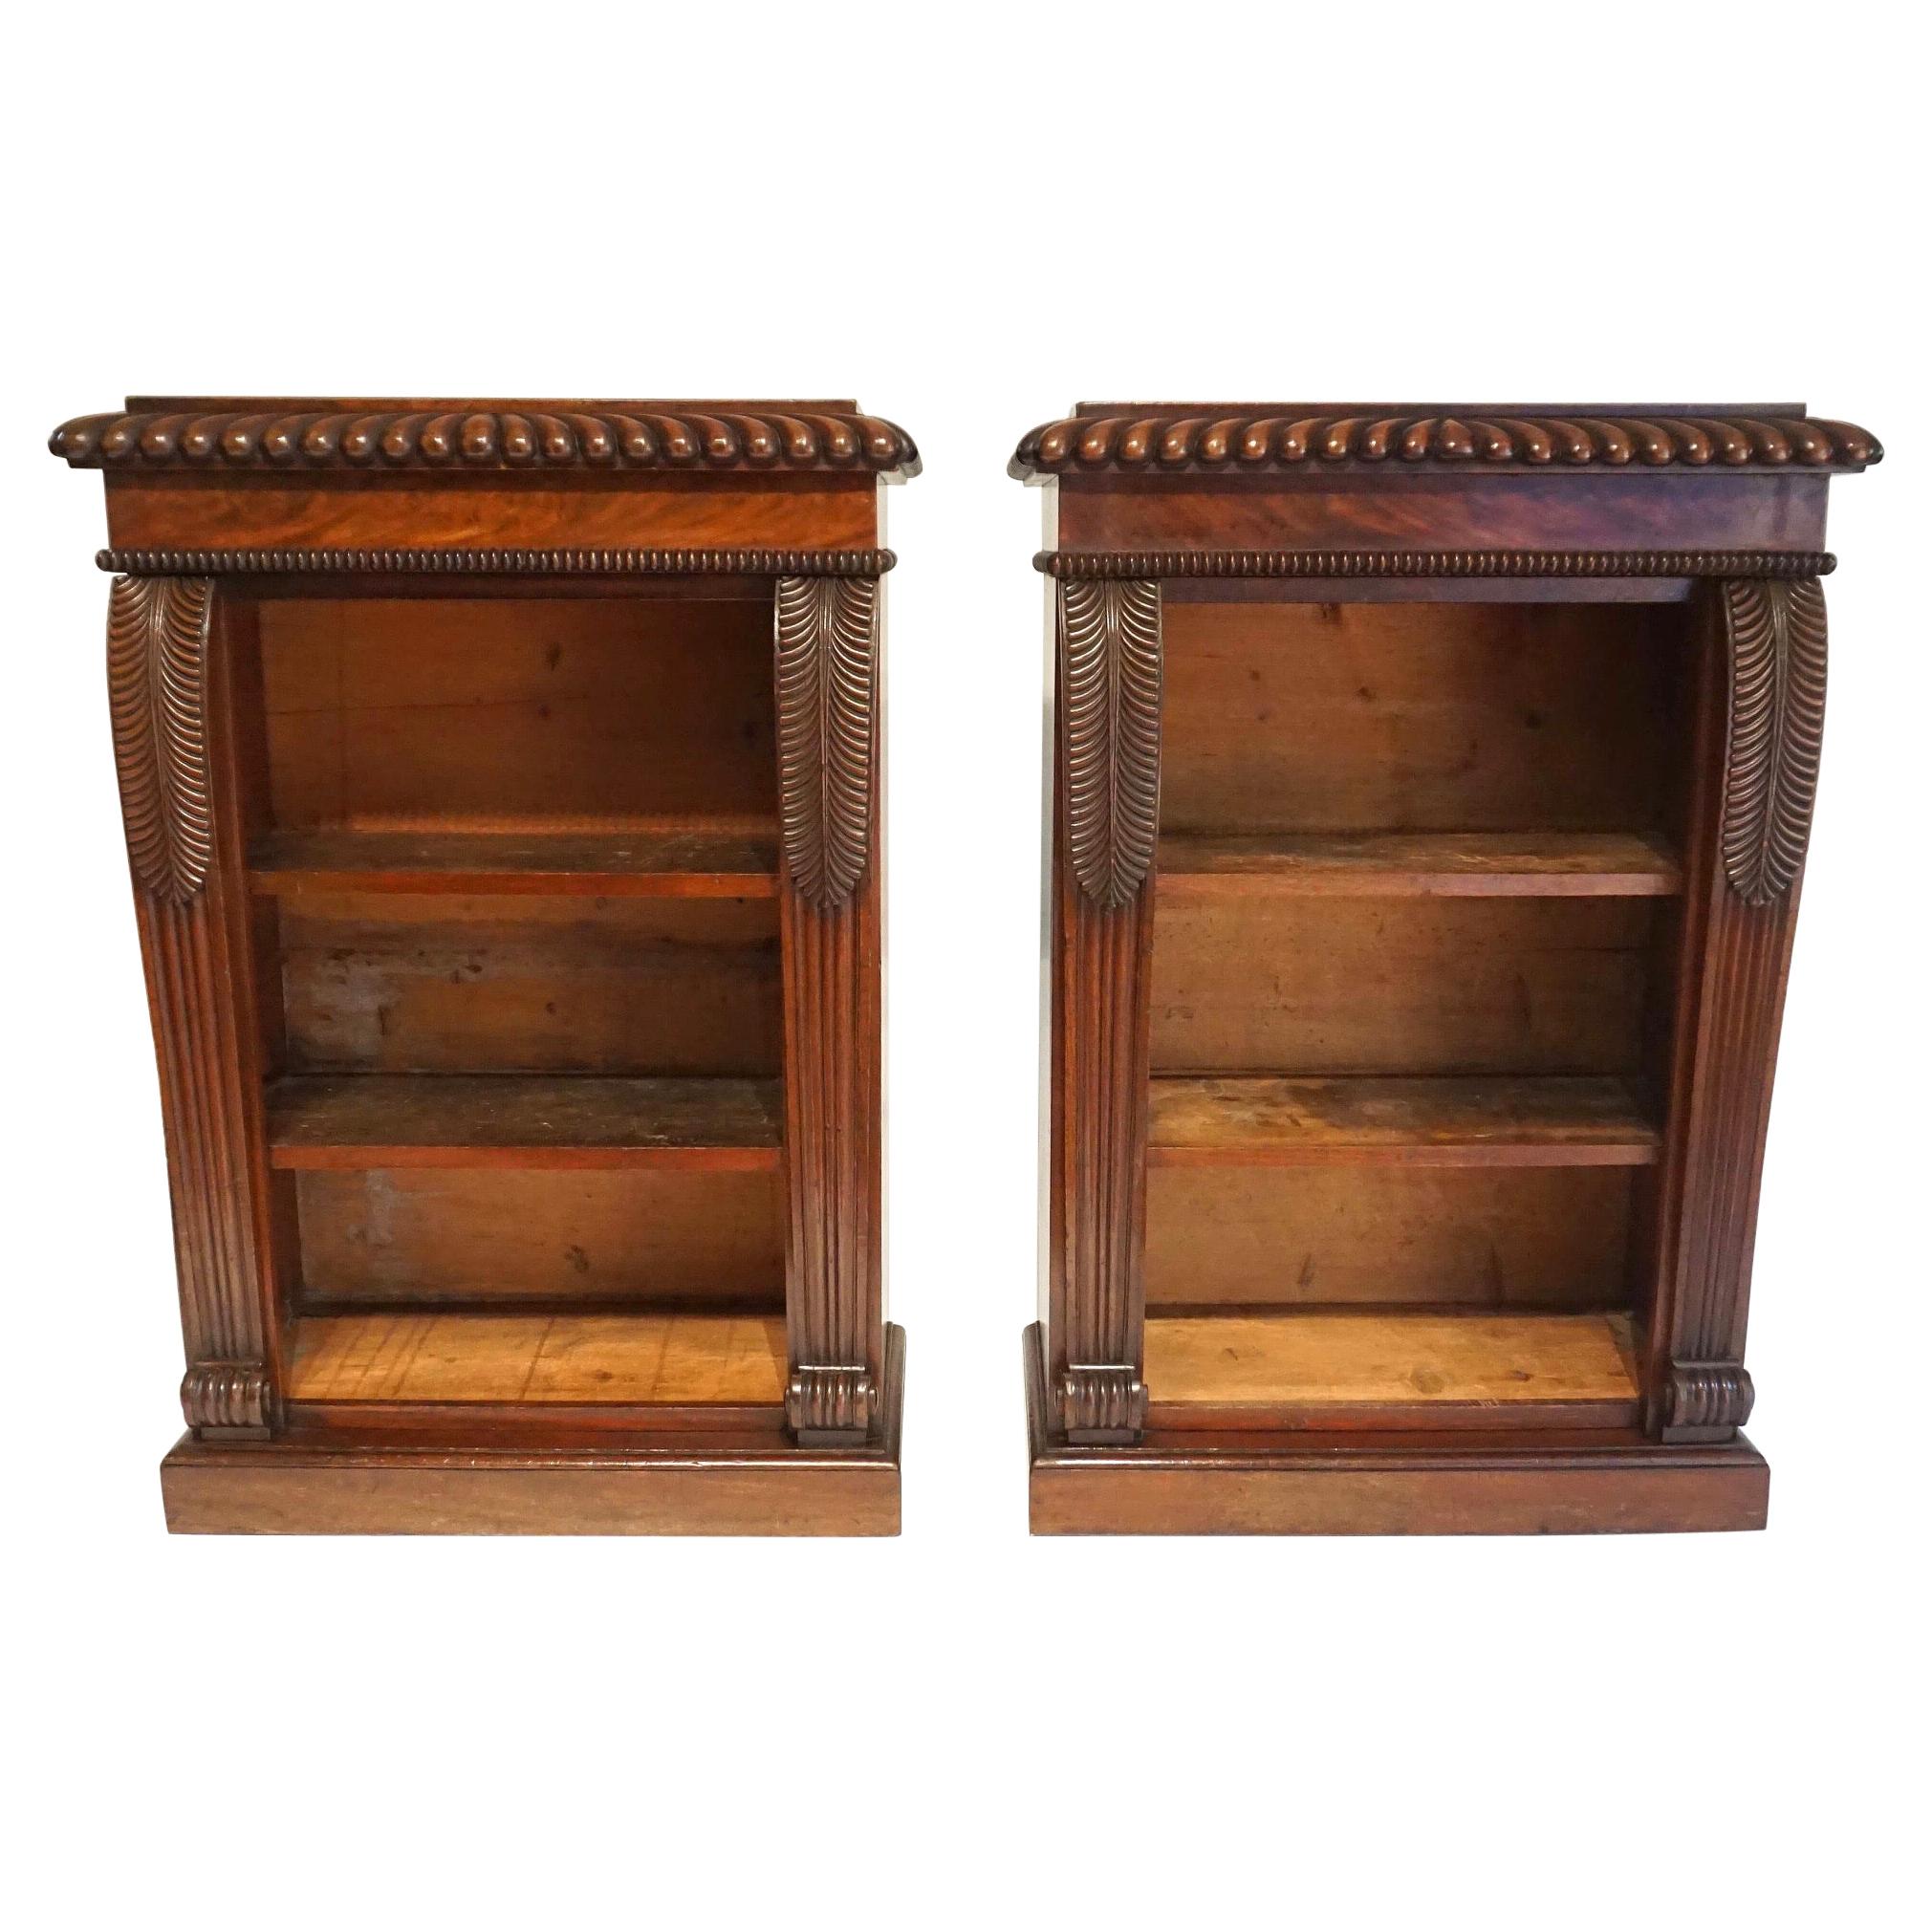 English Regency Neoclassical Mahogany Pair of Dwarf Open Bookcases, circa 1825